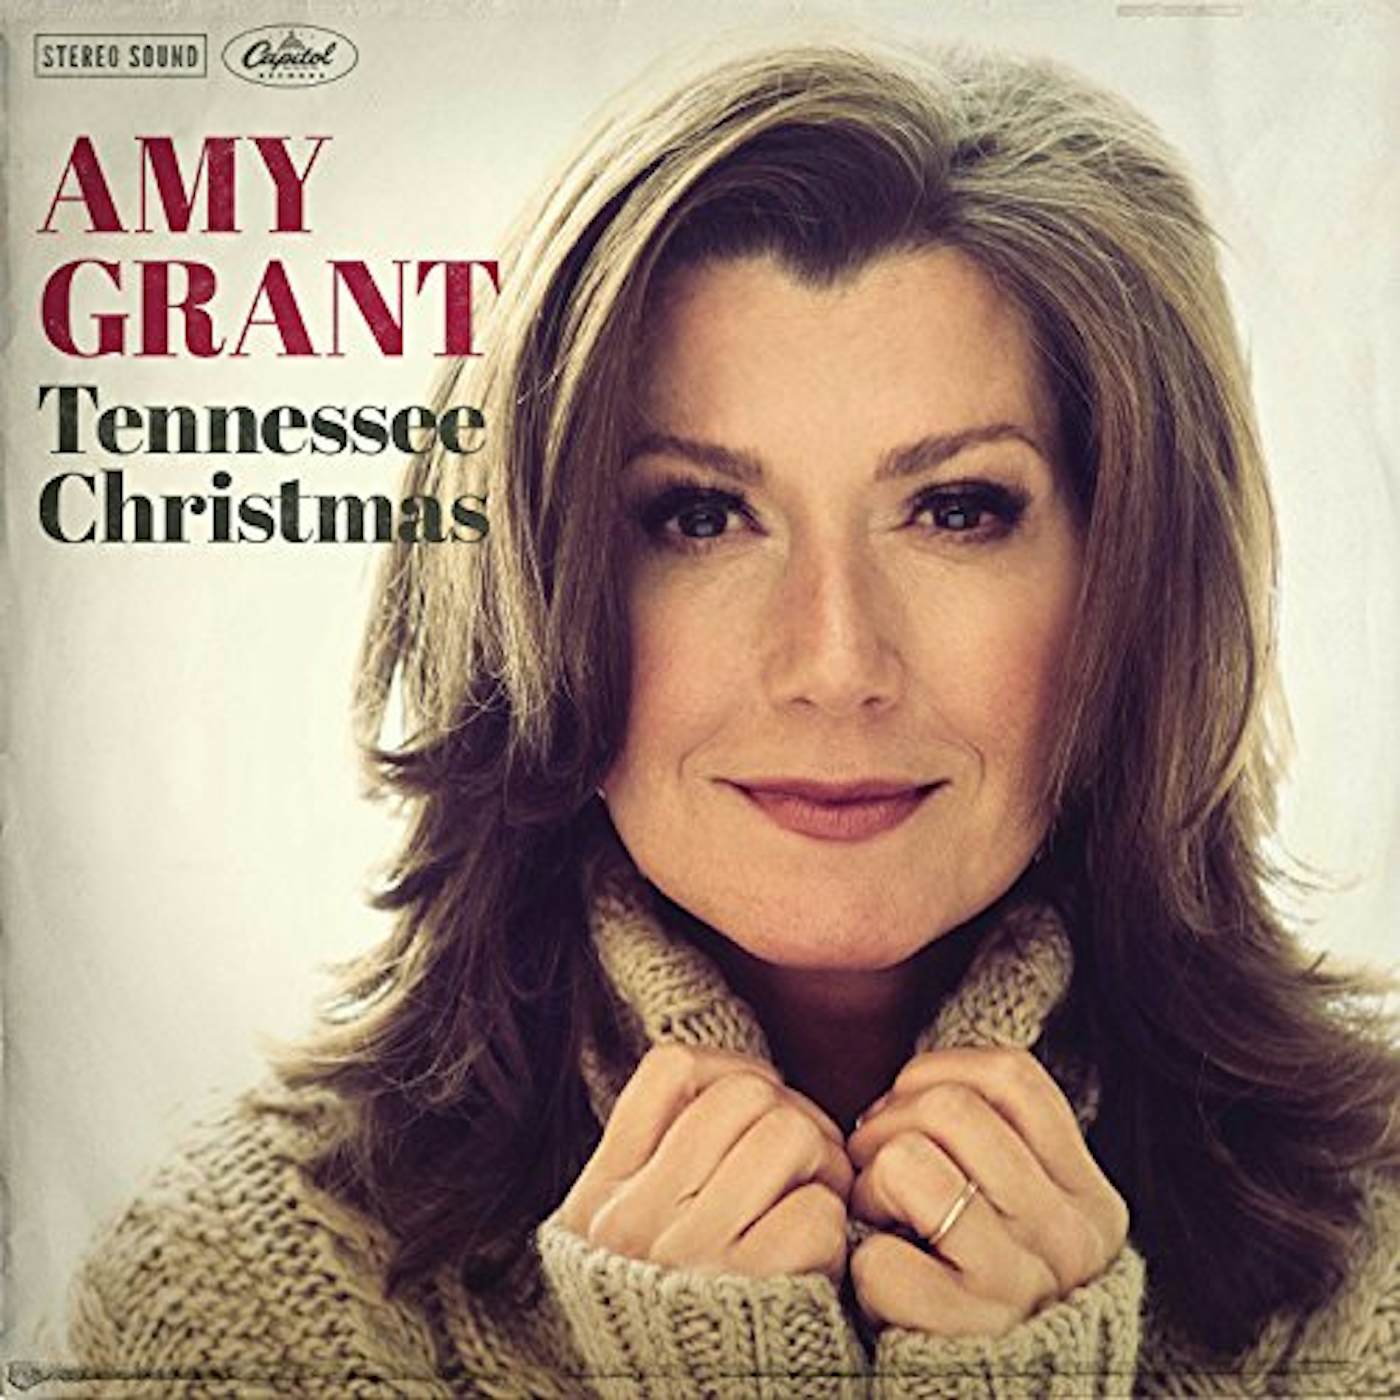 Amy Grant Tennessee Christmas Vinyl Record